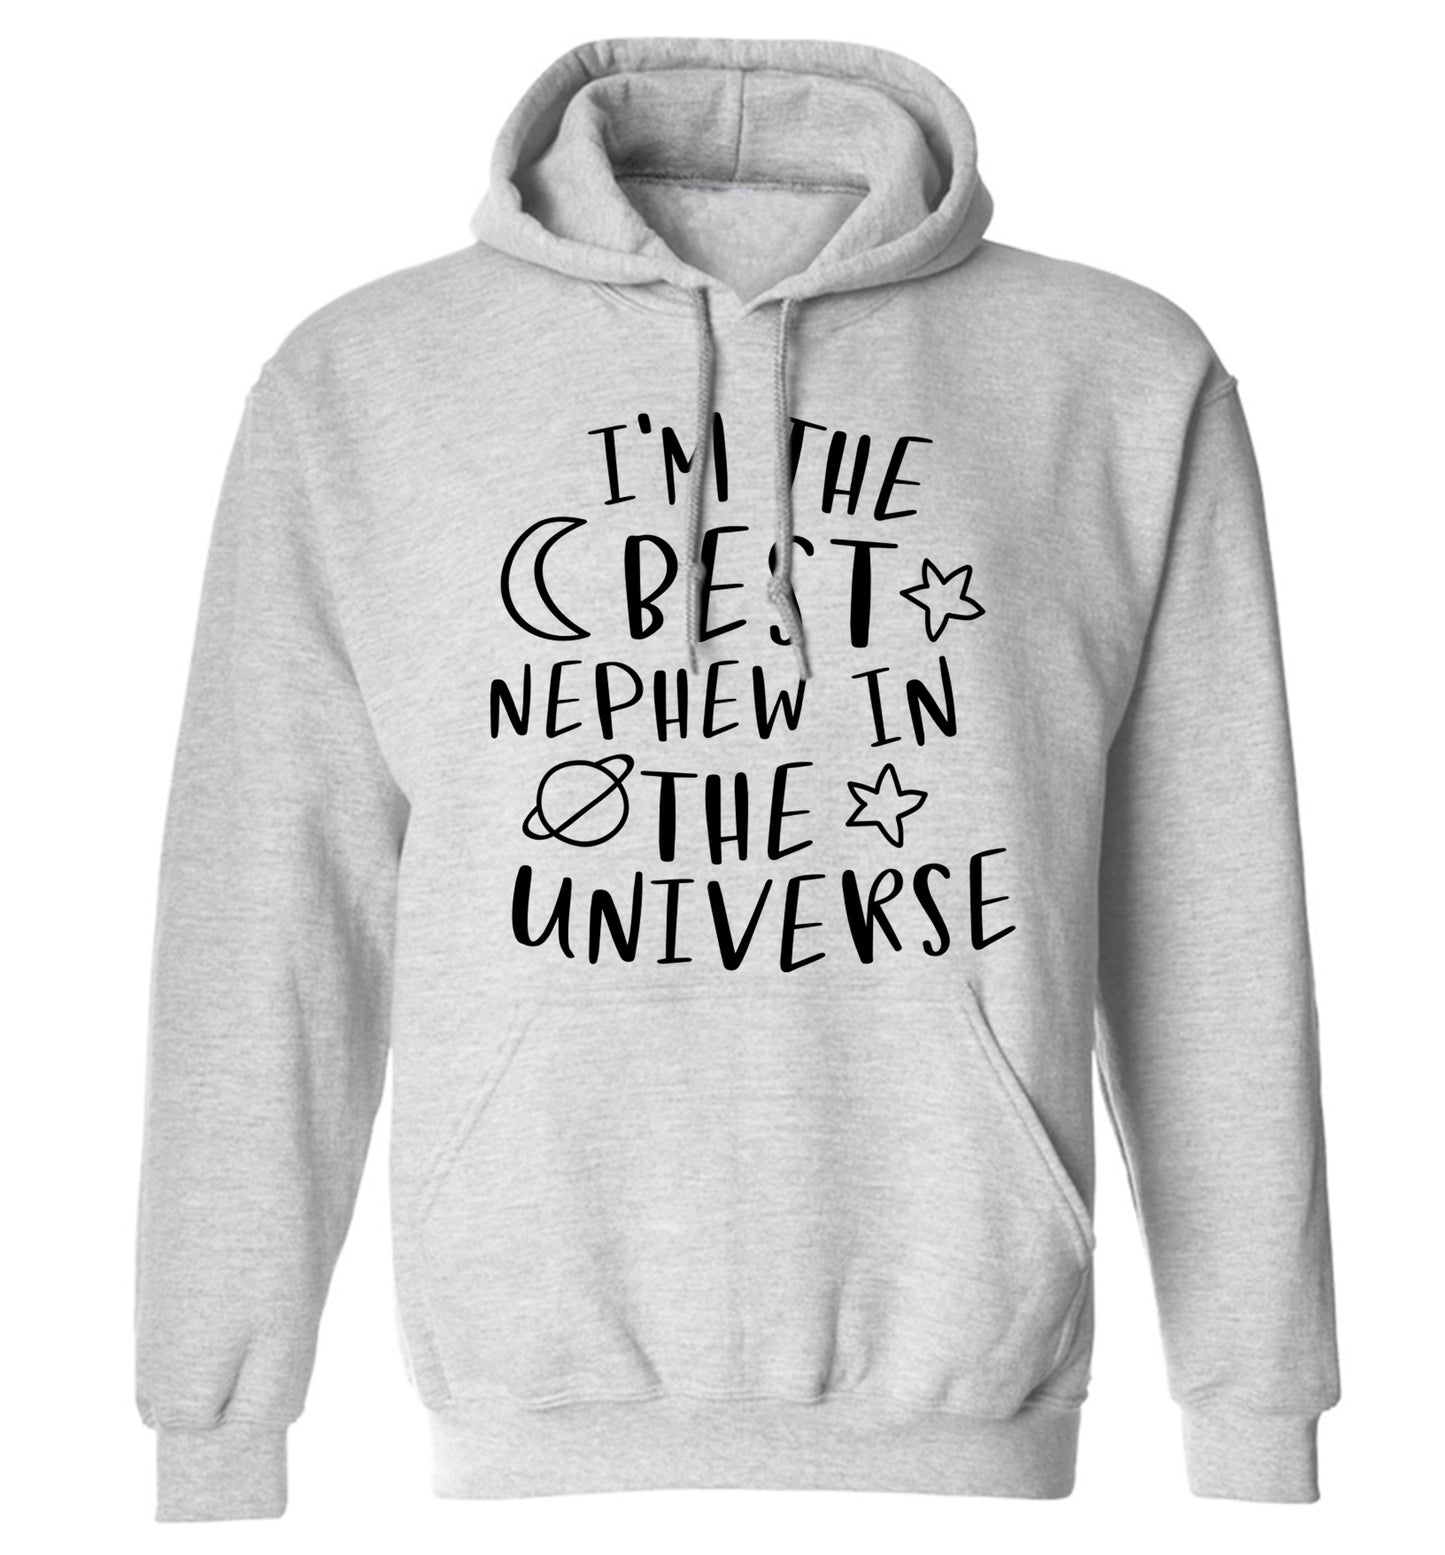 I'm the best nephew in the universe adults unisex grey hoodie 2XL